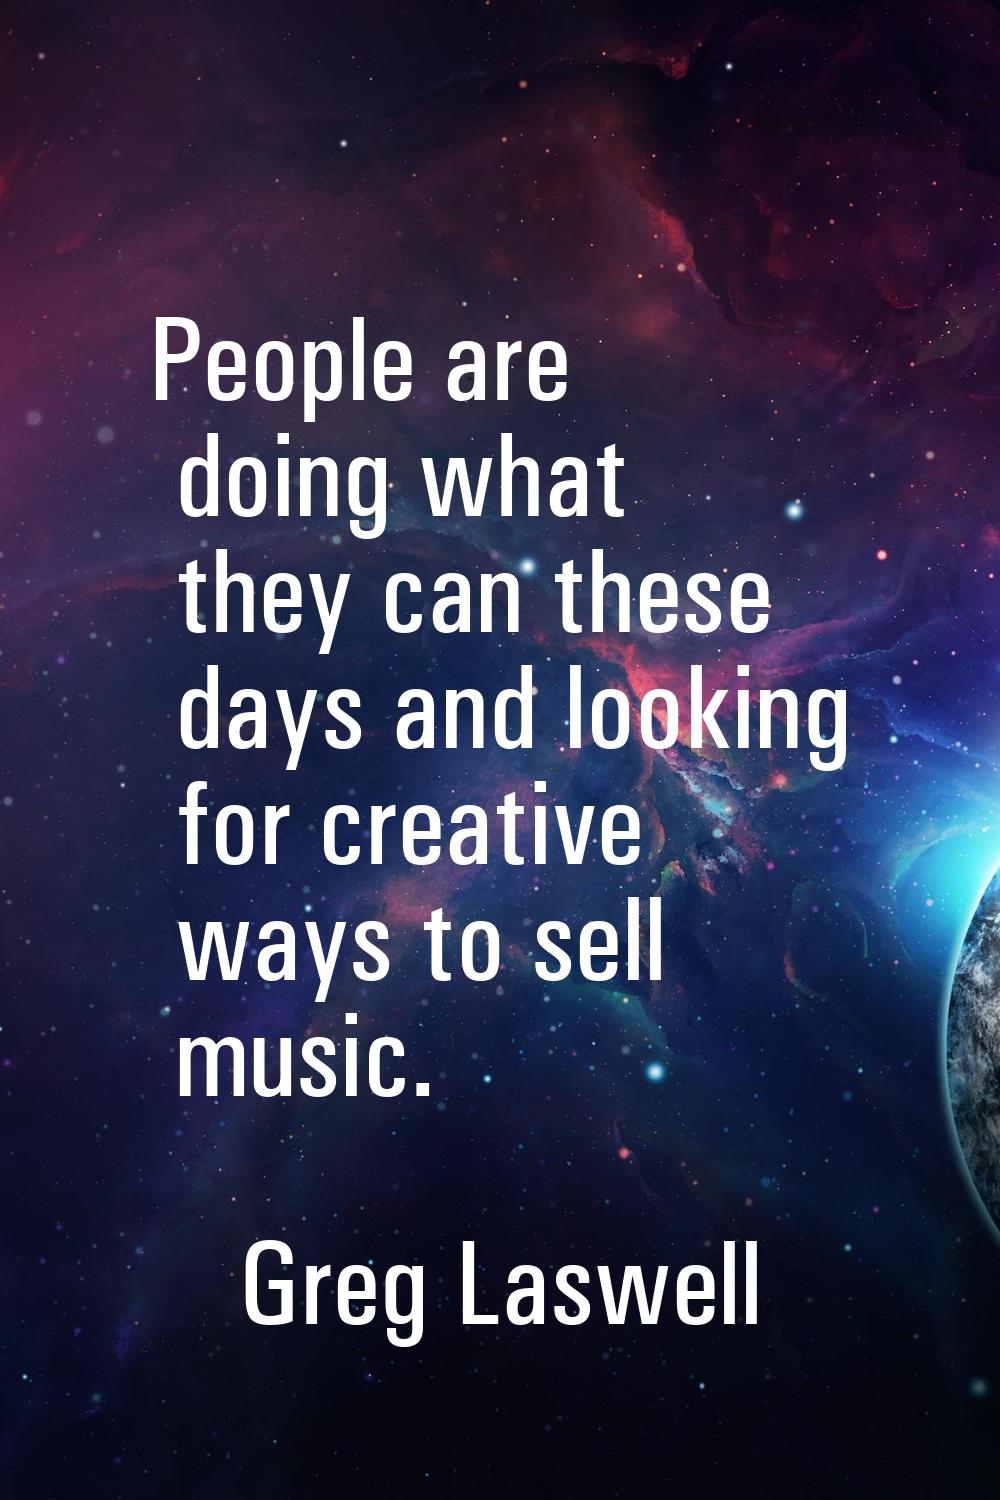 People are doing what they can these days and looking for creative ways to sell music.